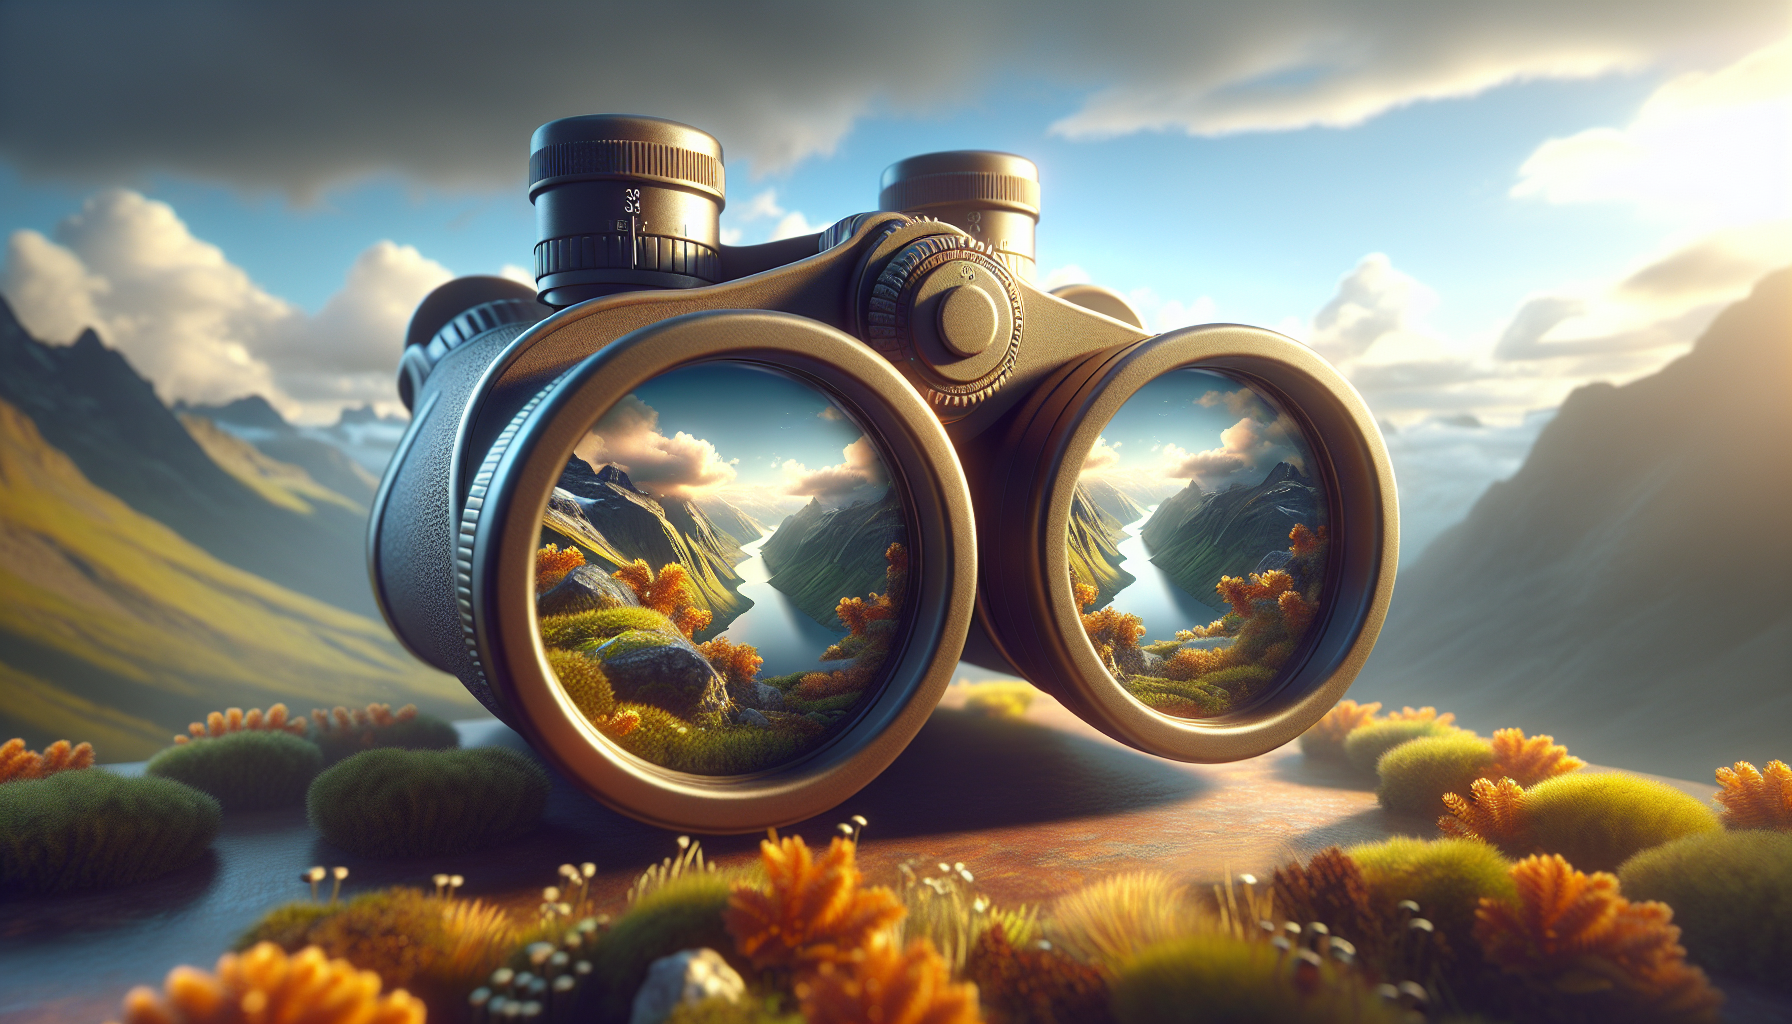 How Does The Field Of View In Binoculars Influence What You See?